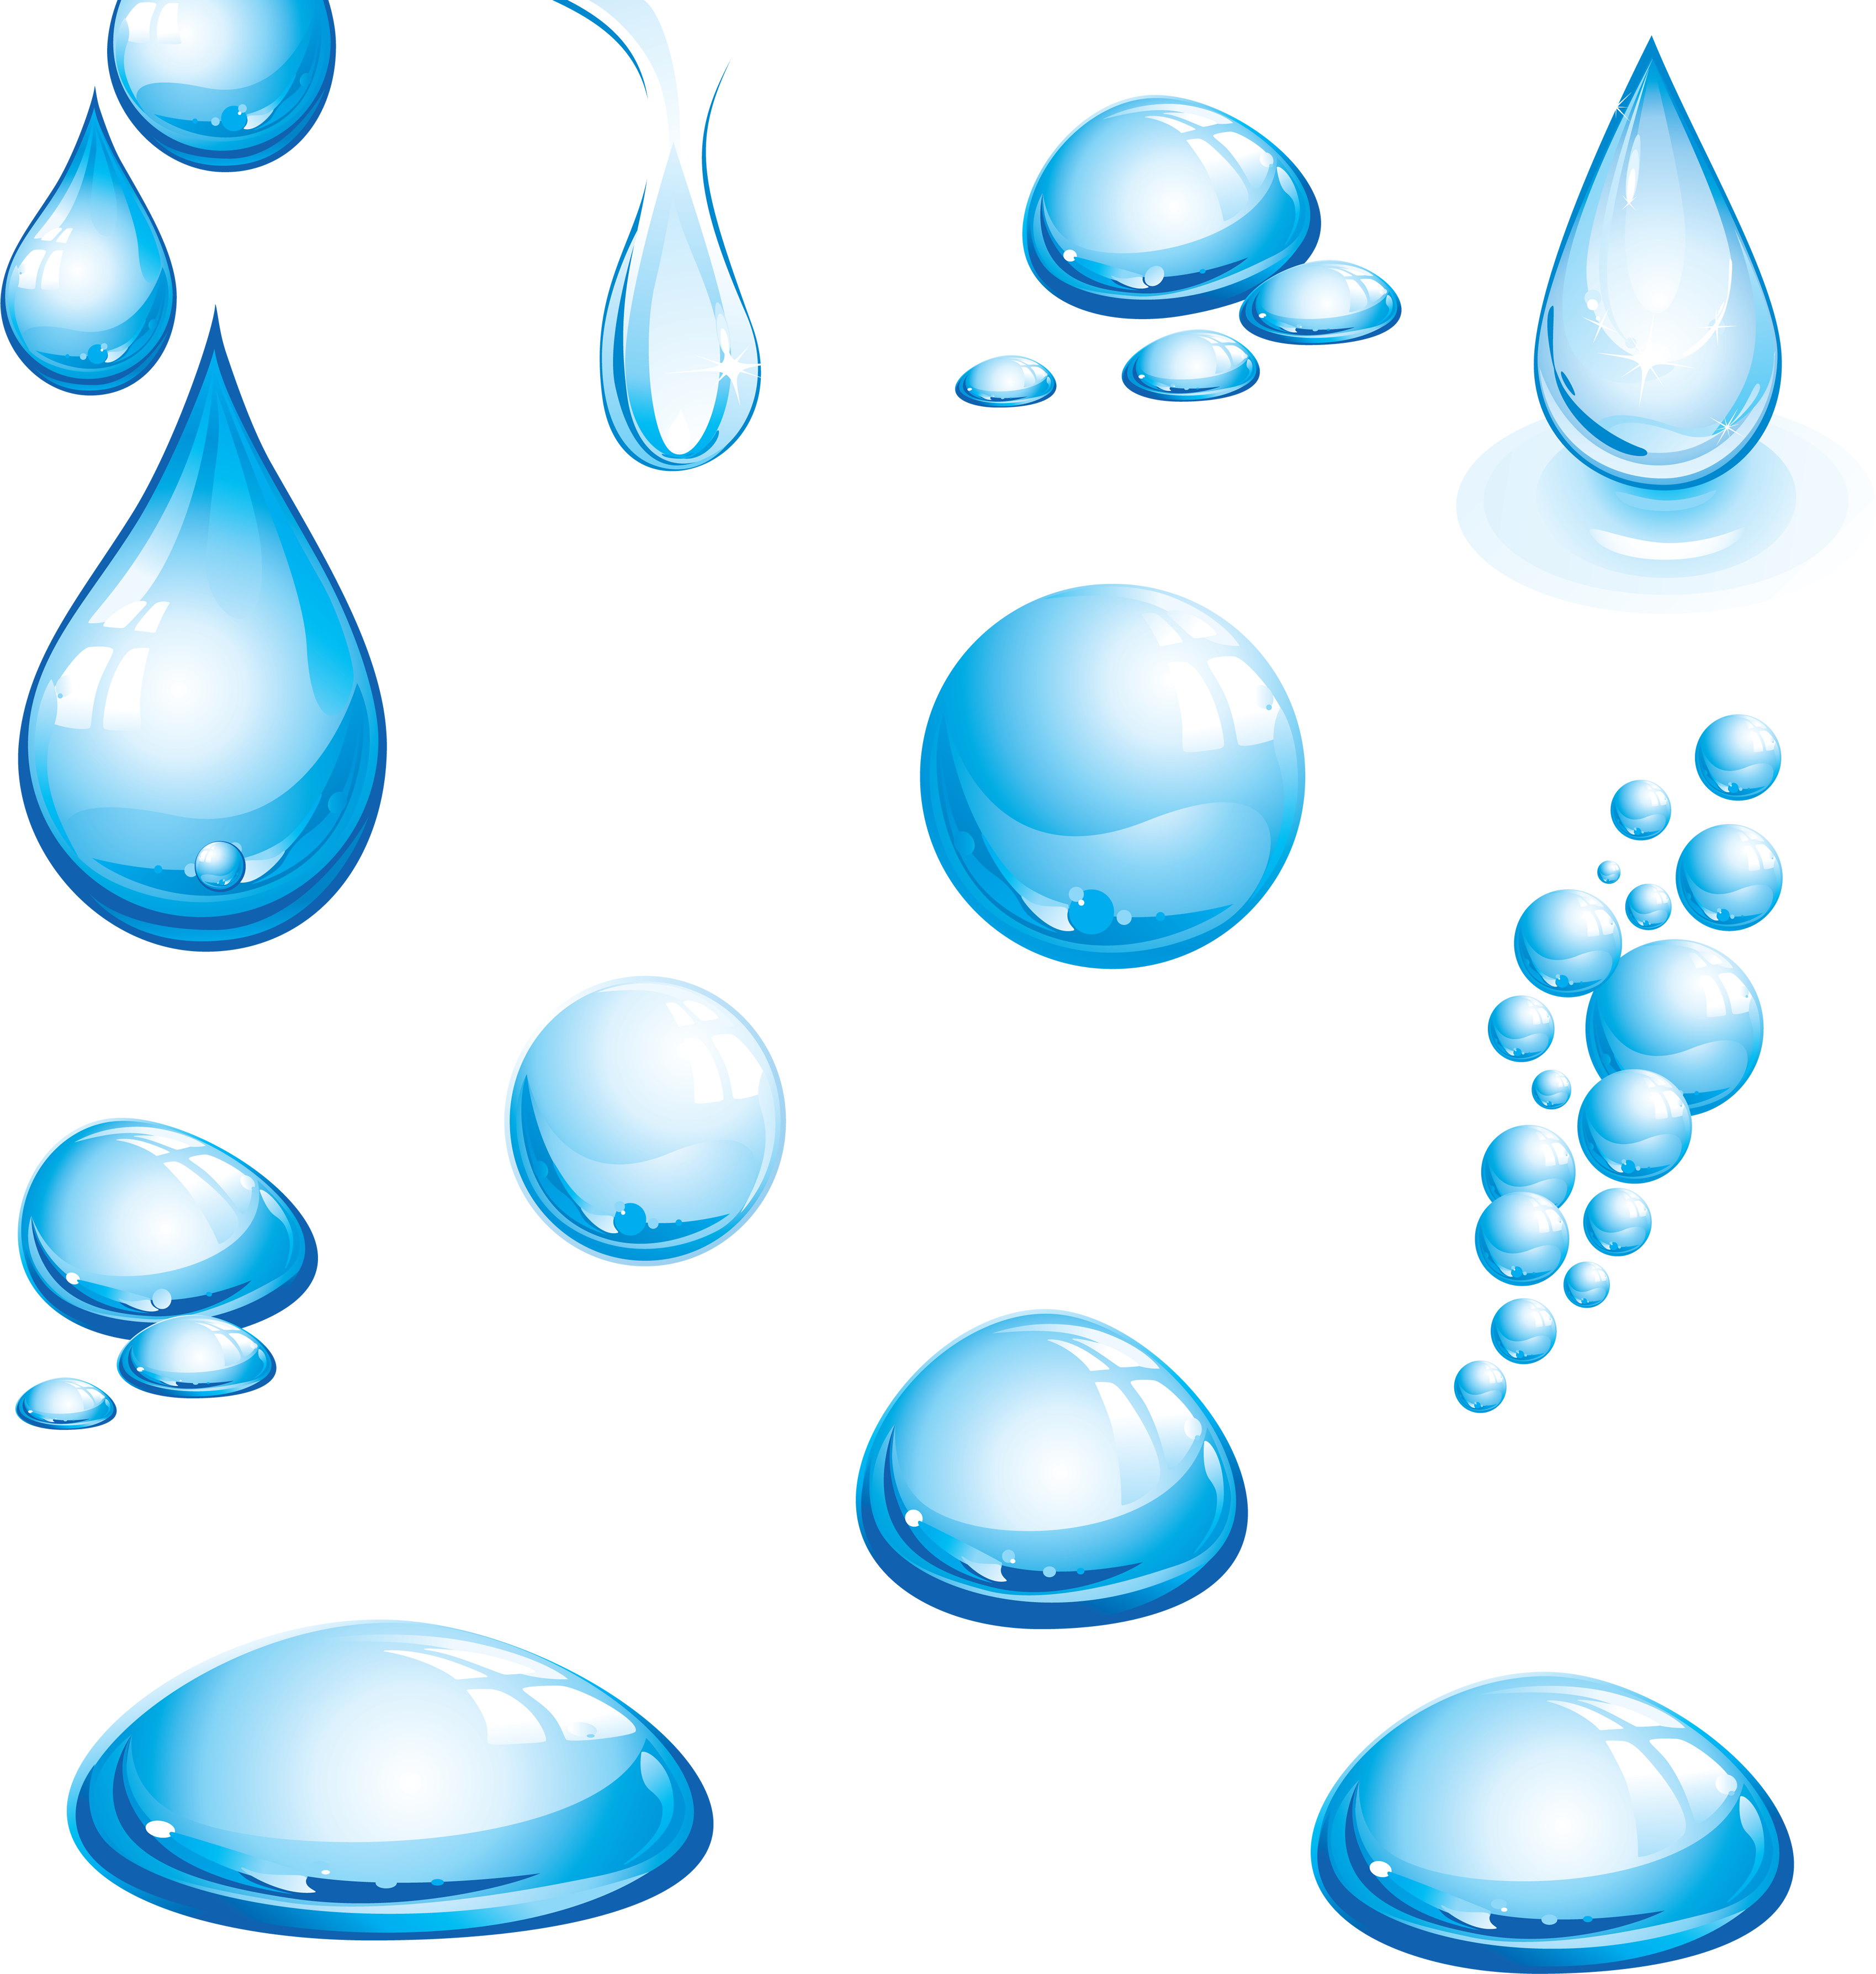 Water PNG image, free water drops PNG image download